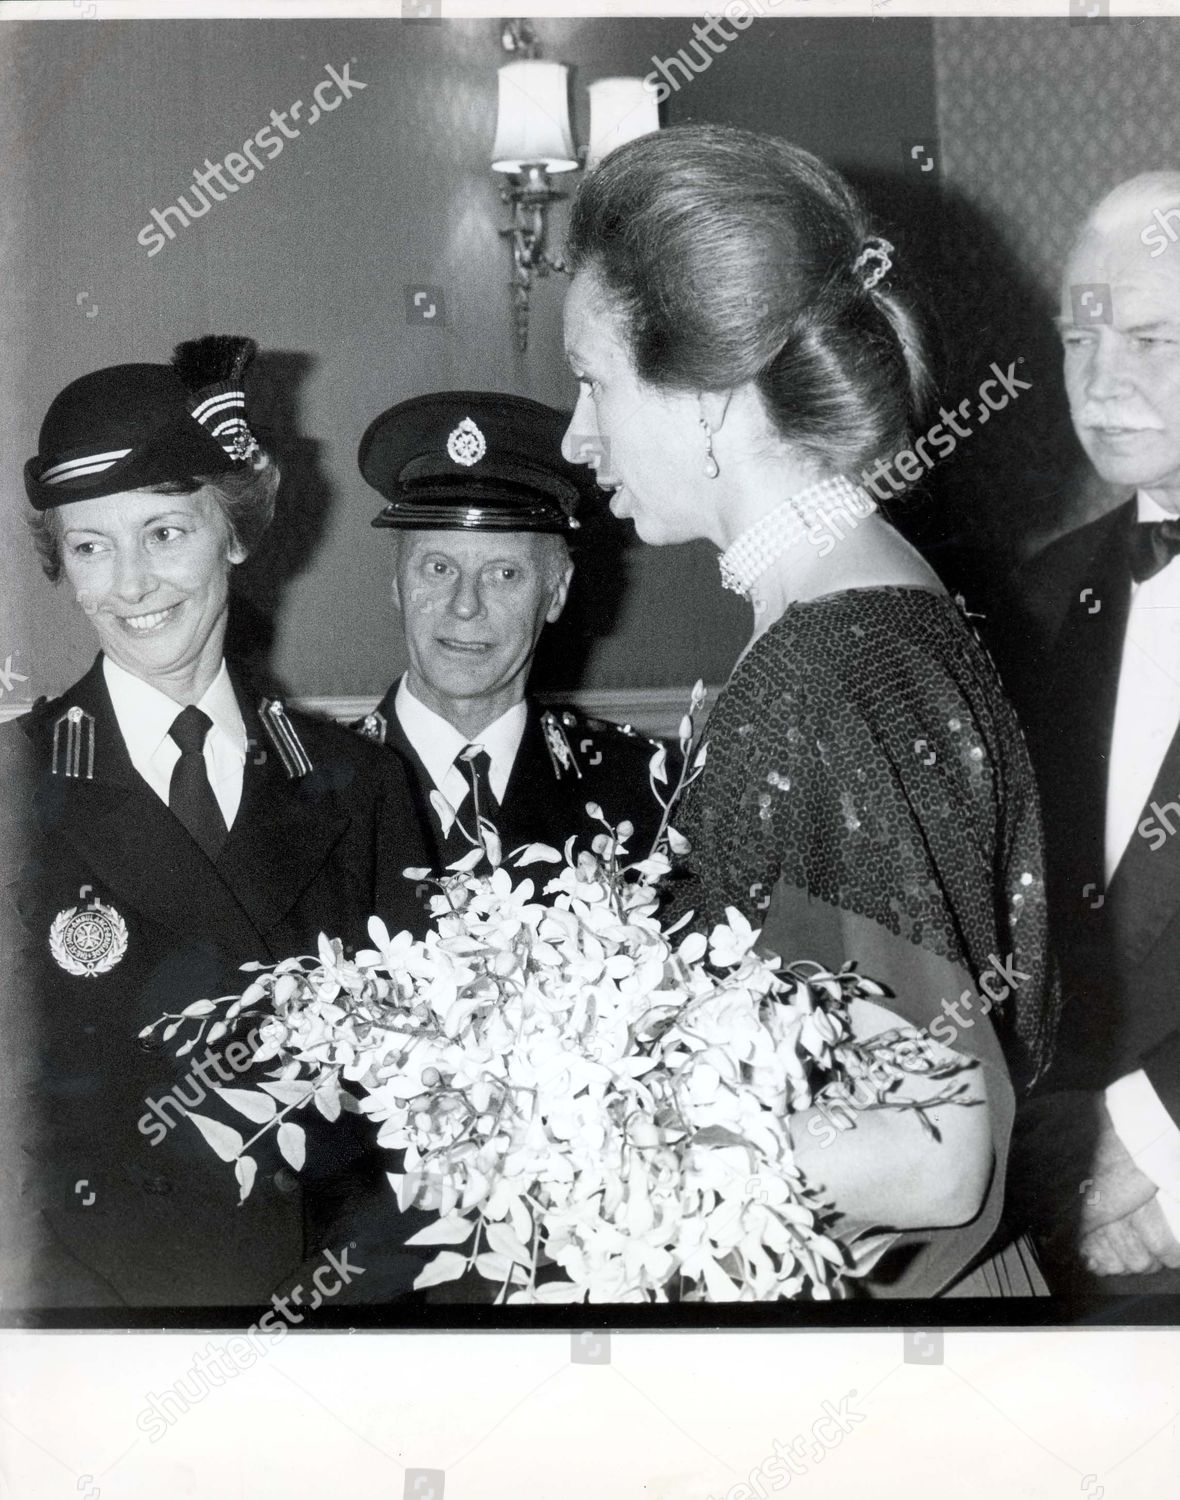 princess-anne-now-princess-royal-1984-picture-shows-hrh-princess-anne-at-the-royal-albert-hall-where-she-was-attending-frank-sinatra-concert-shutterstock-editorial-1044034a.jpg